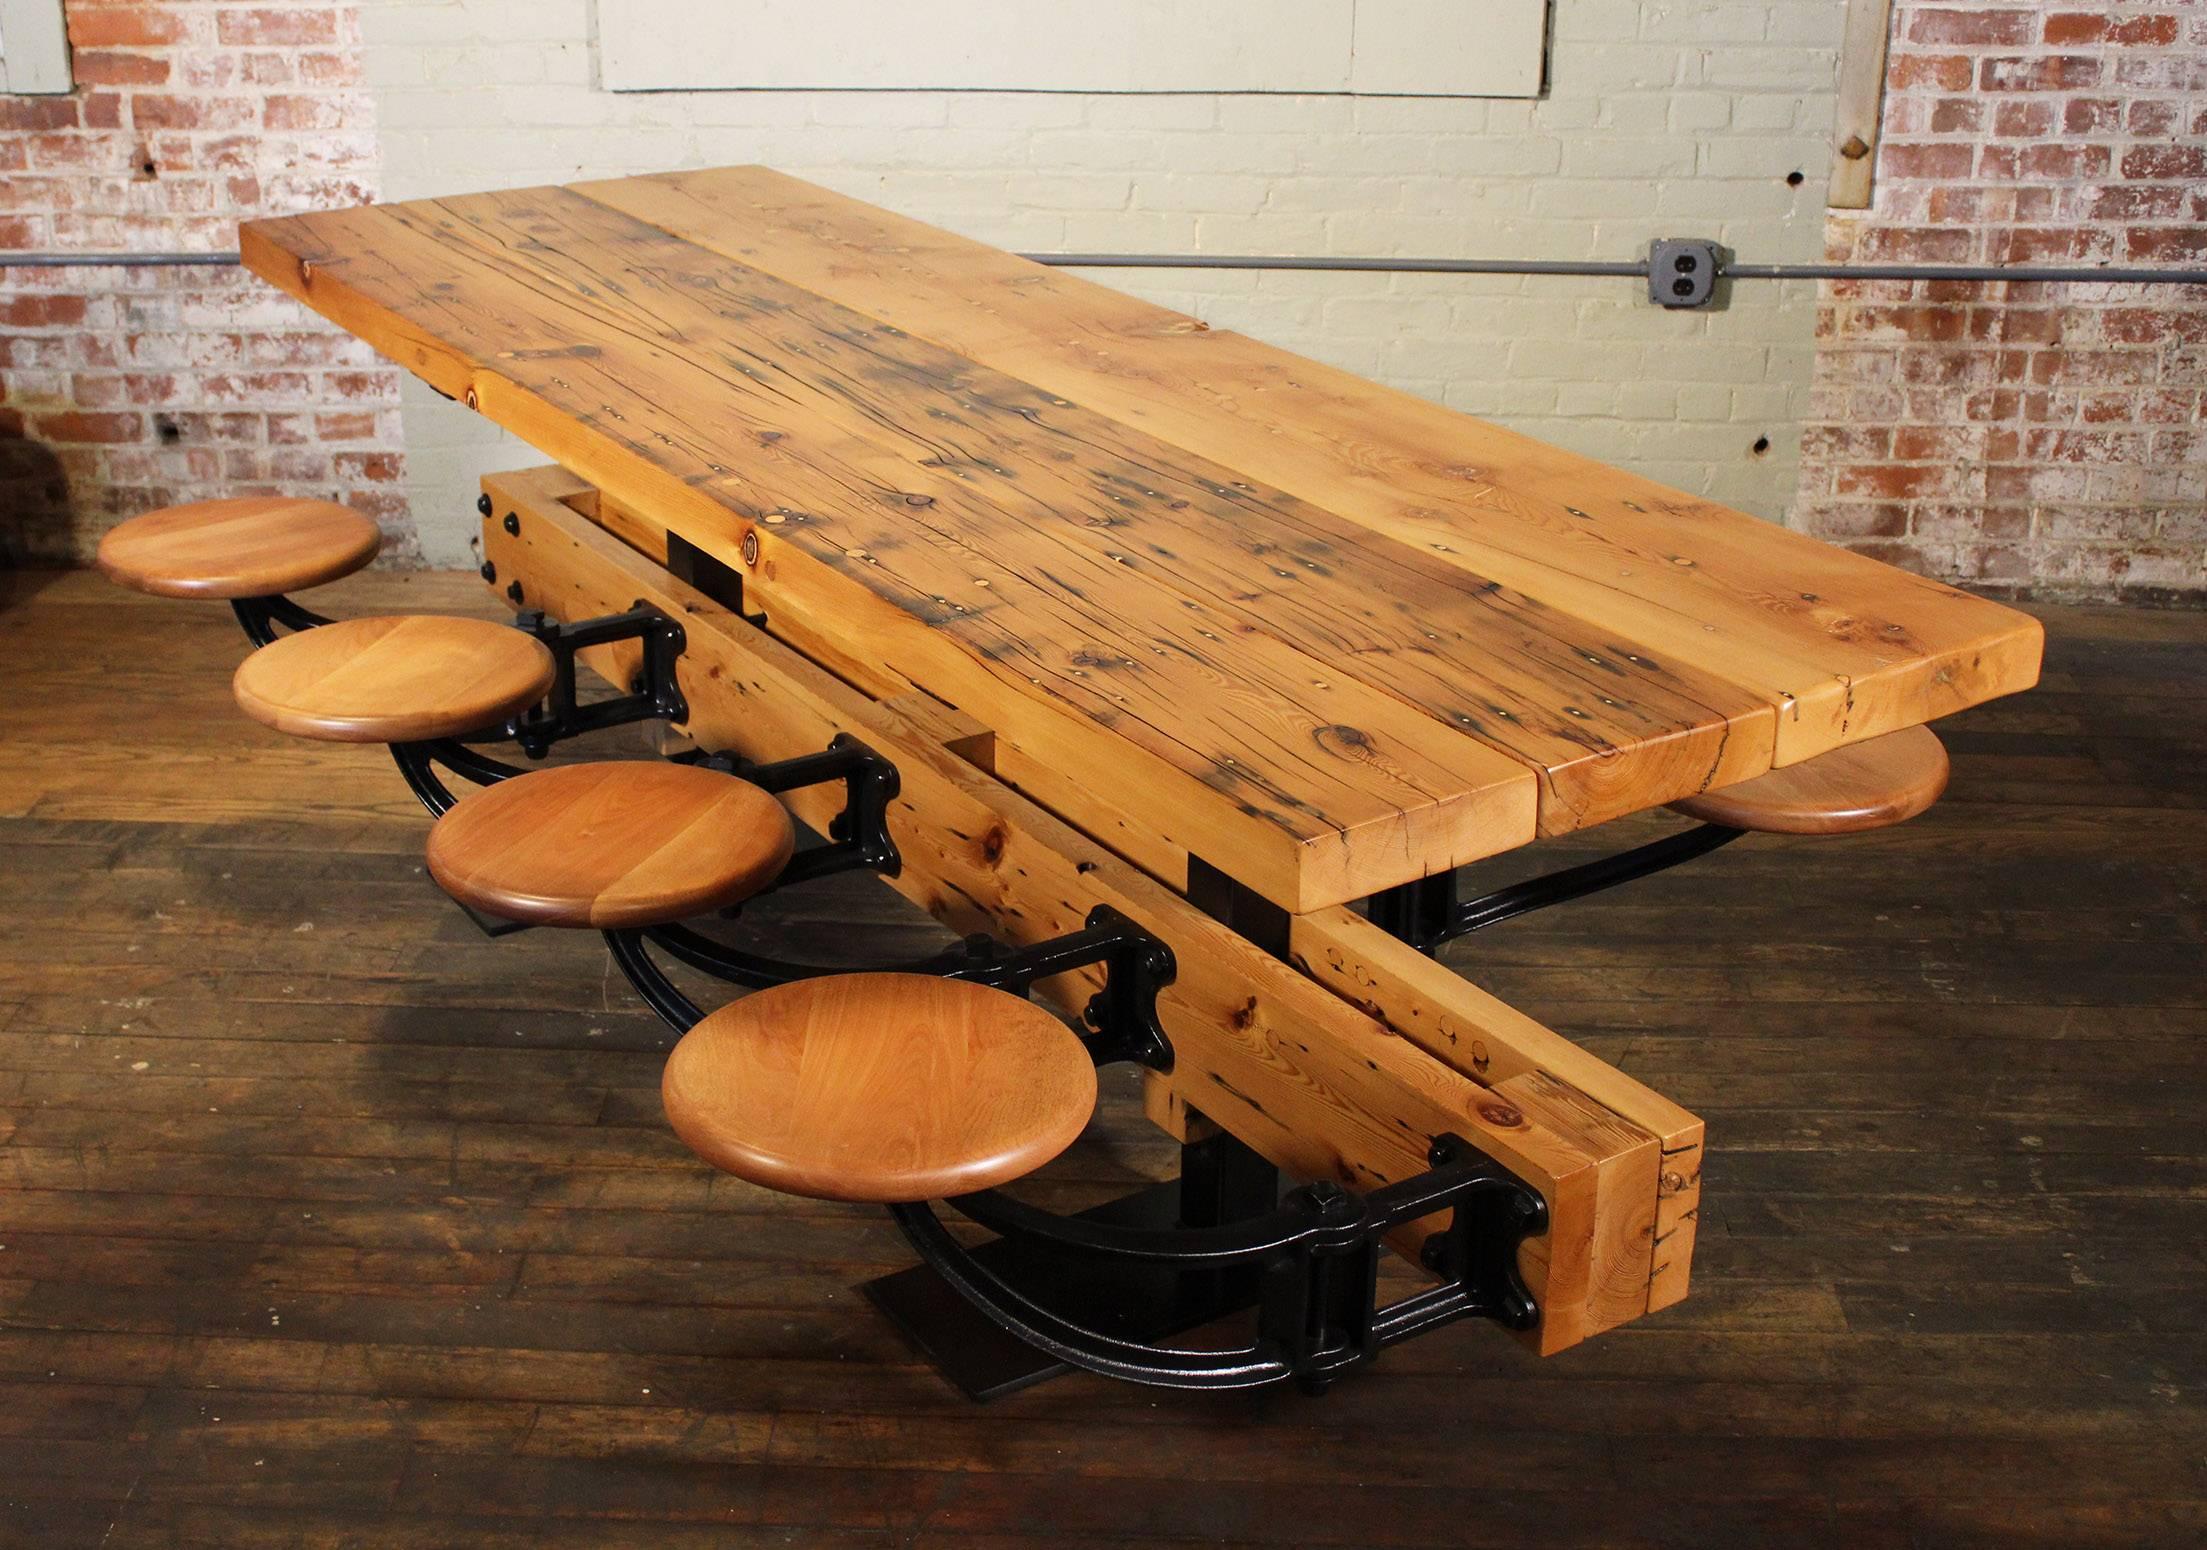 Reclaimed wood and cast Iron eight-seat dining table with seats, chairs, indoor picnic, breakfast, kitchen. Measures: 96